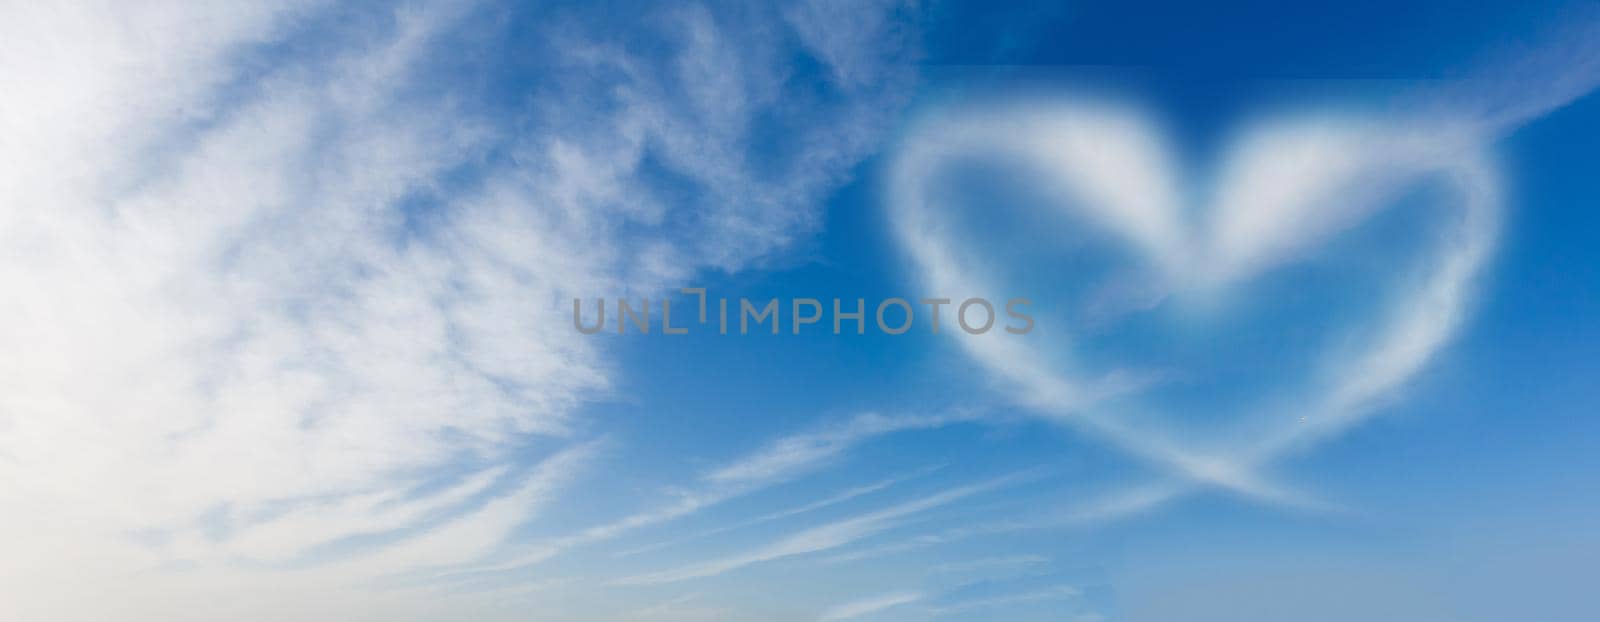 blue sky with hearts shape clouds. Beauty natural background by Andelov13